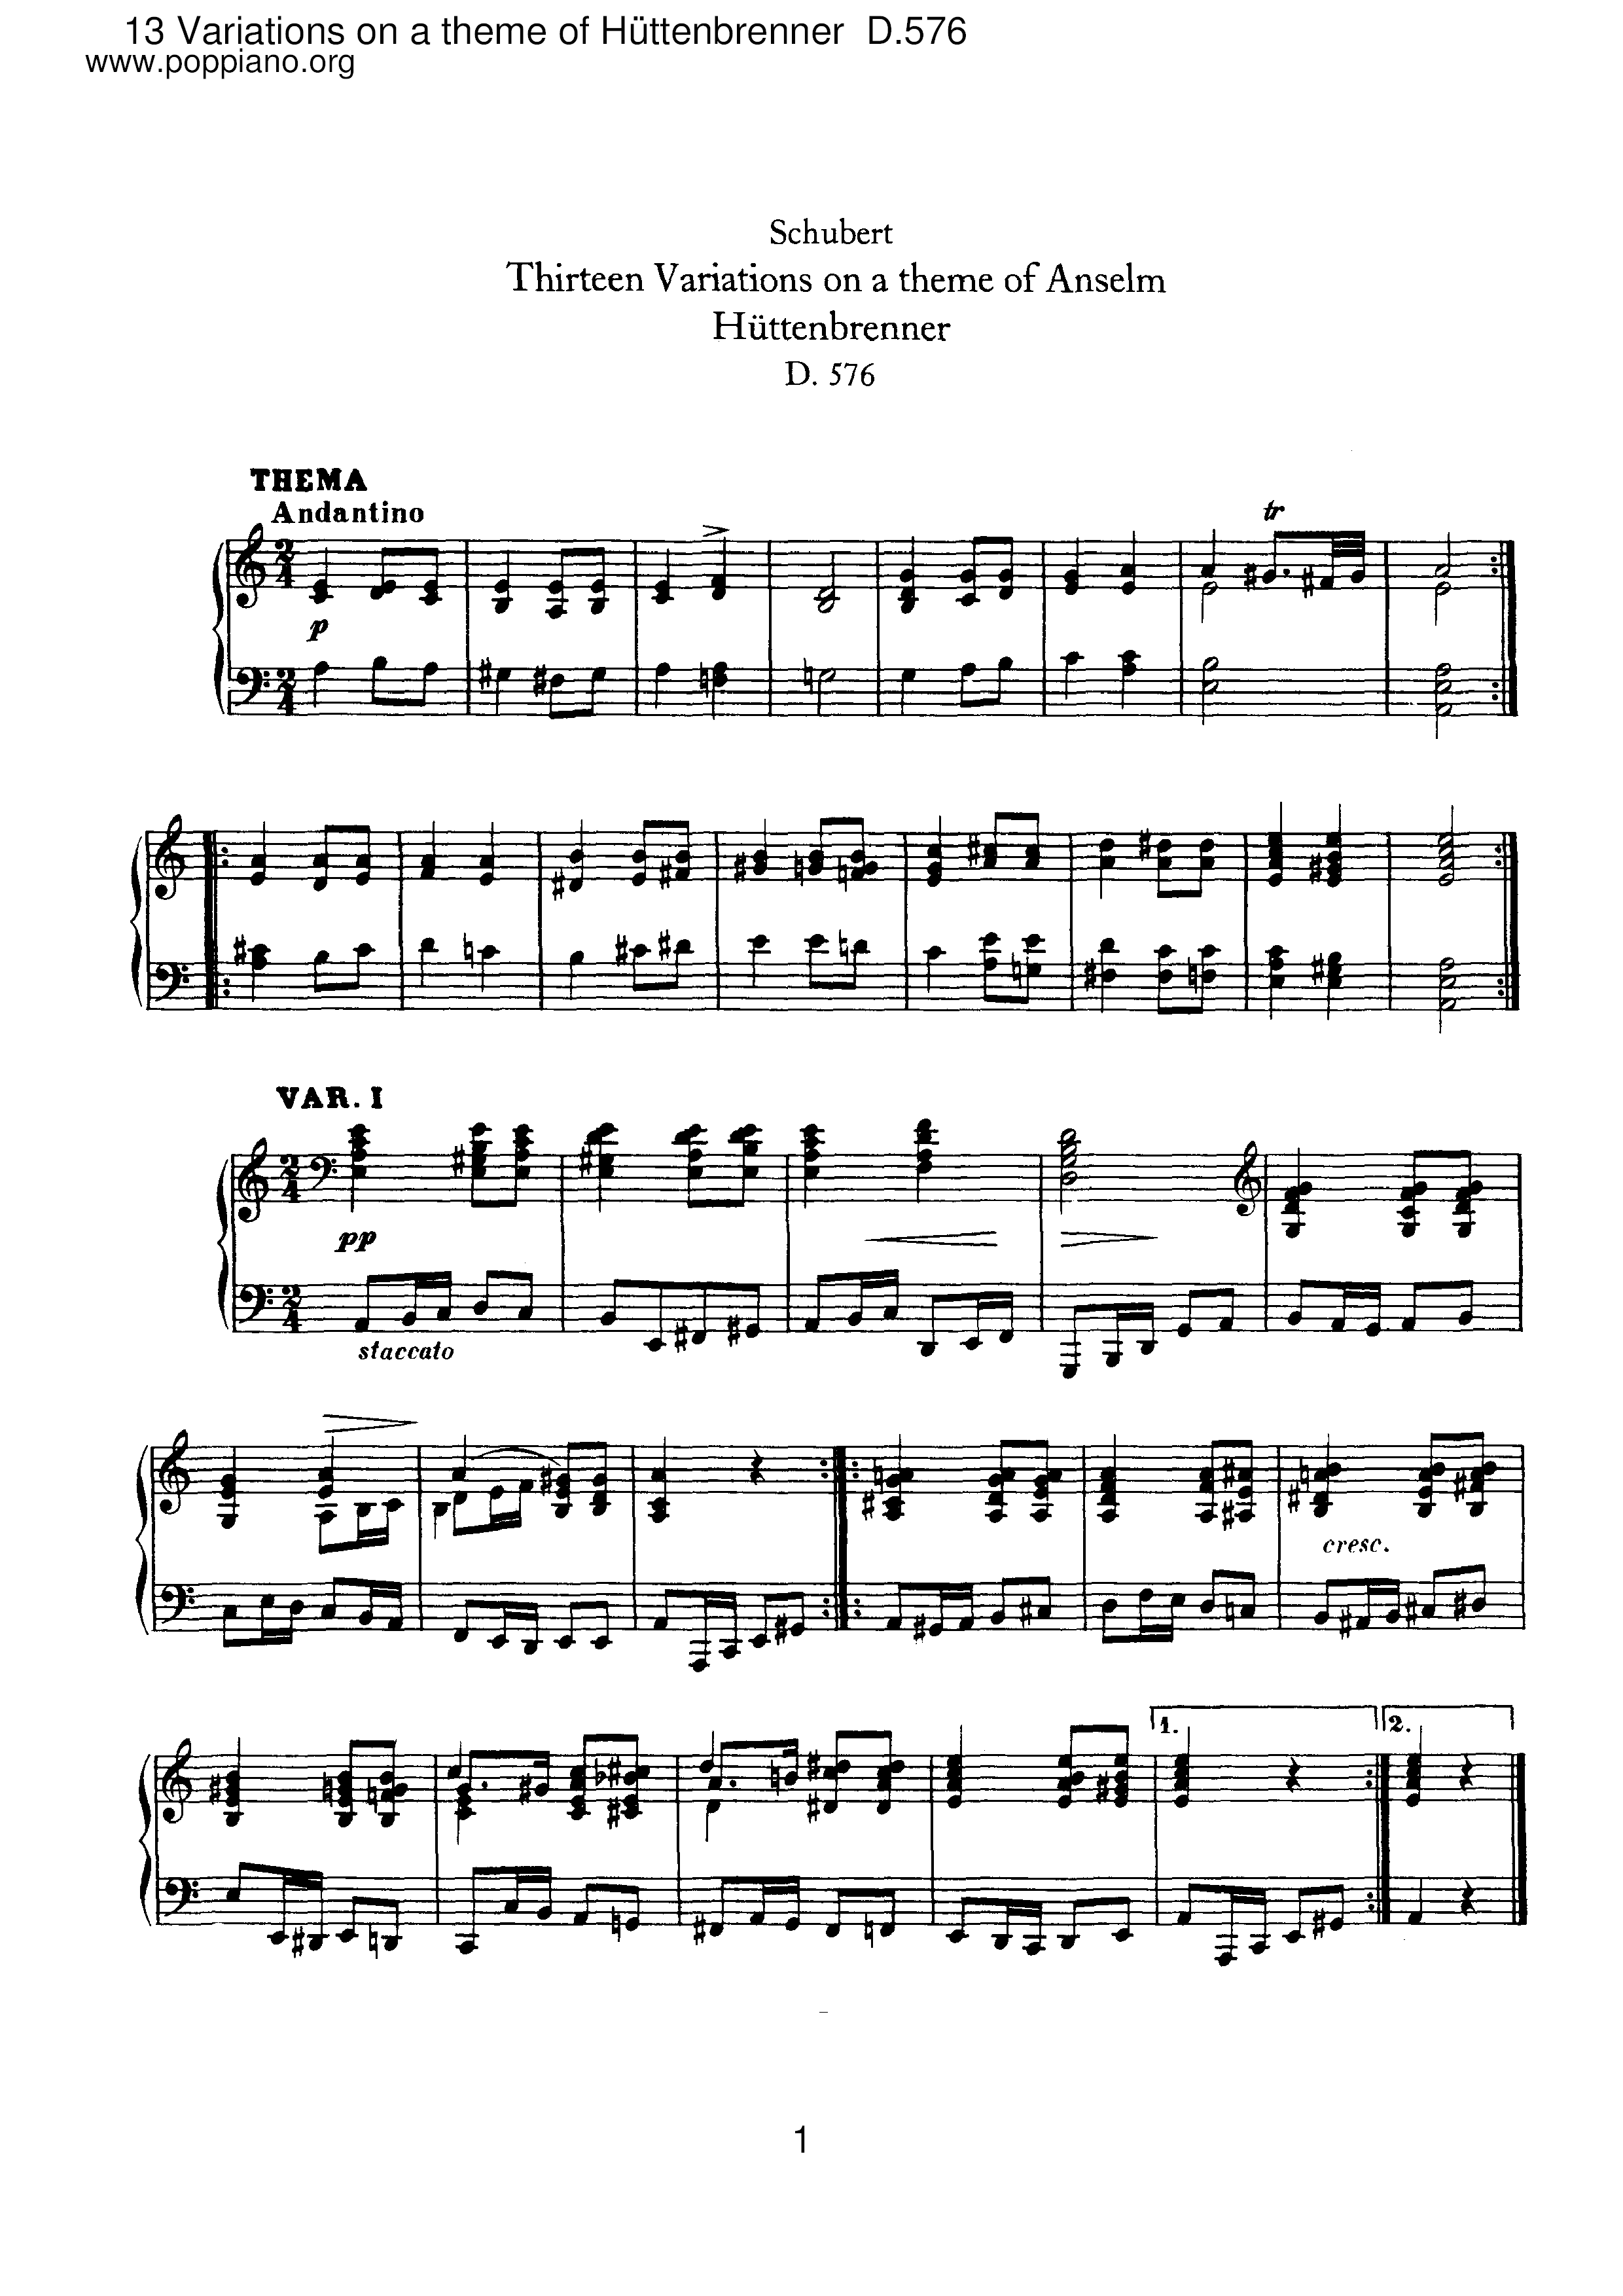 13 Variations on a Theme of Huttenbrennet, D.576ピアノ譜